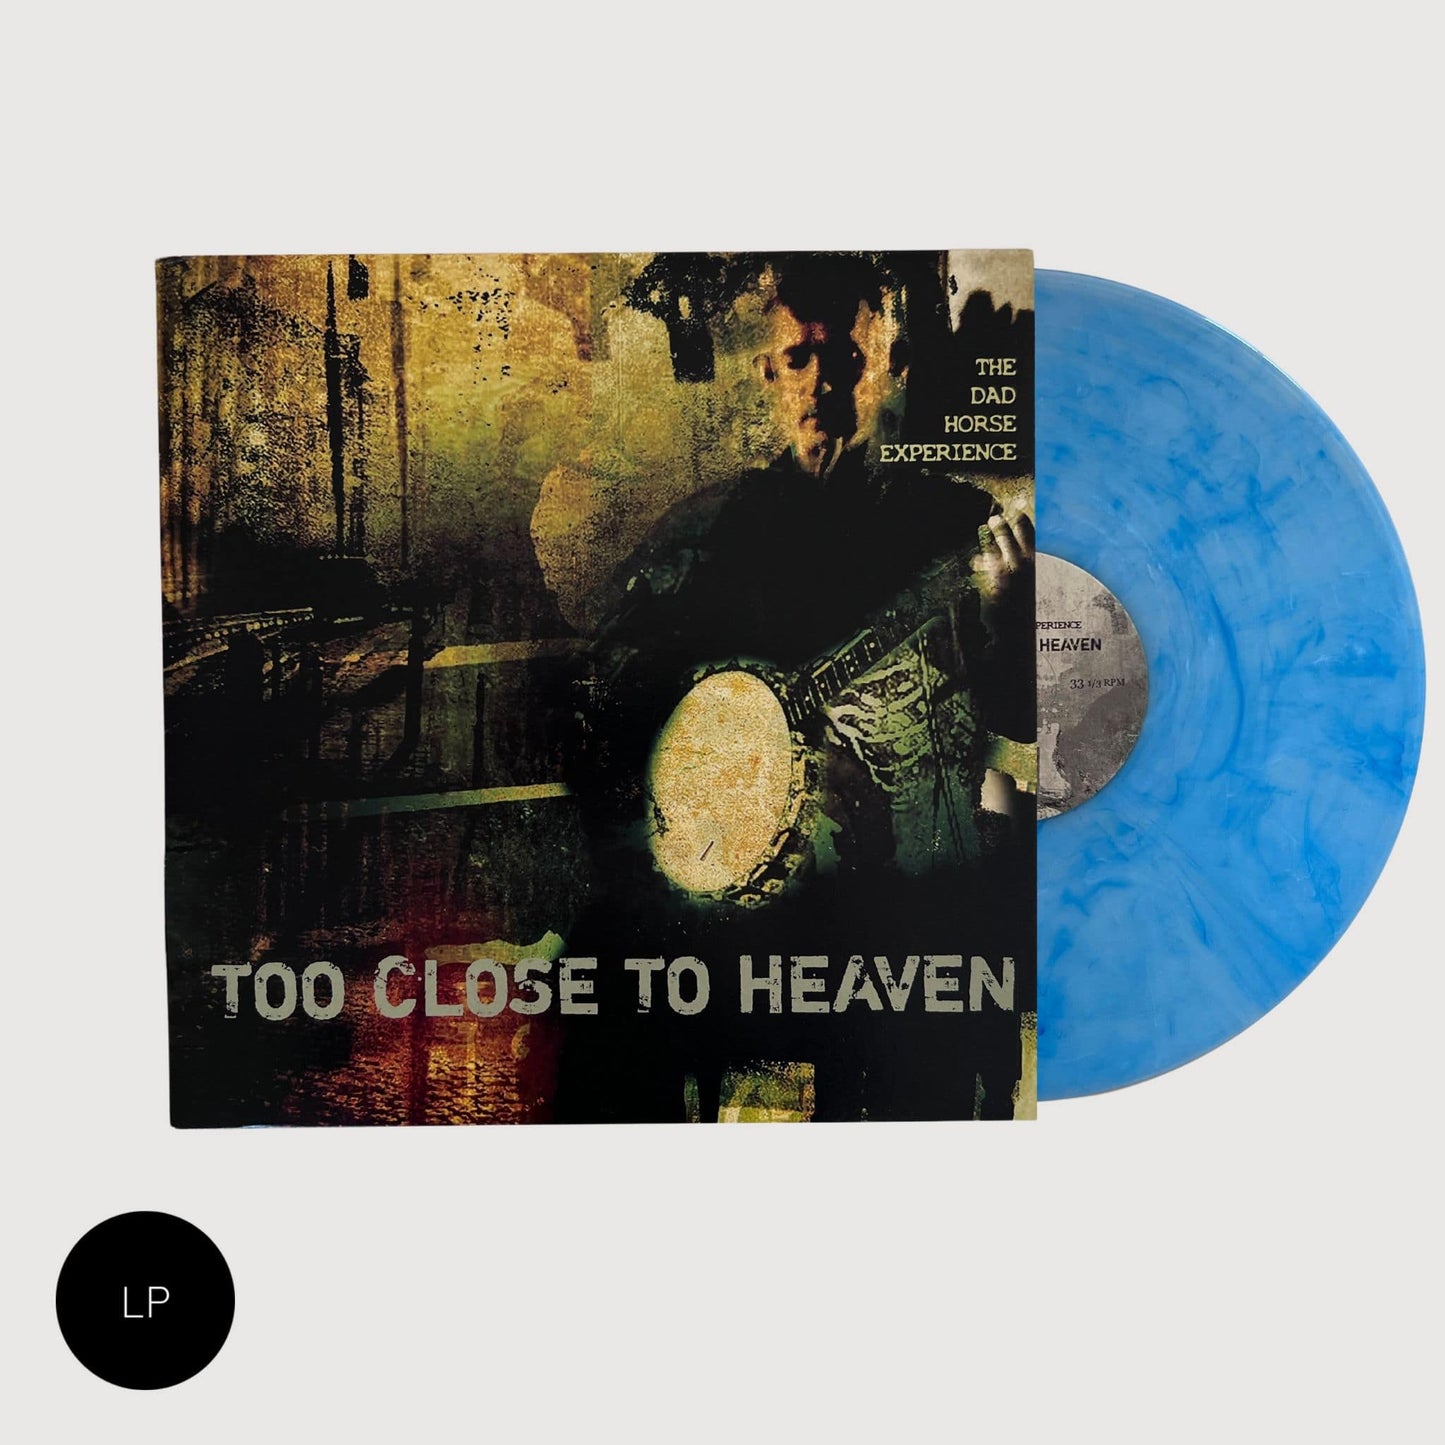 The Dad Horse Experience: Too Close To Heaven 12" Vinyl